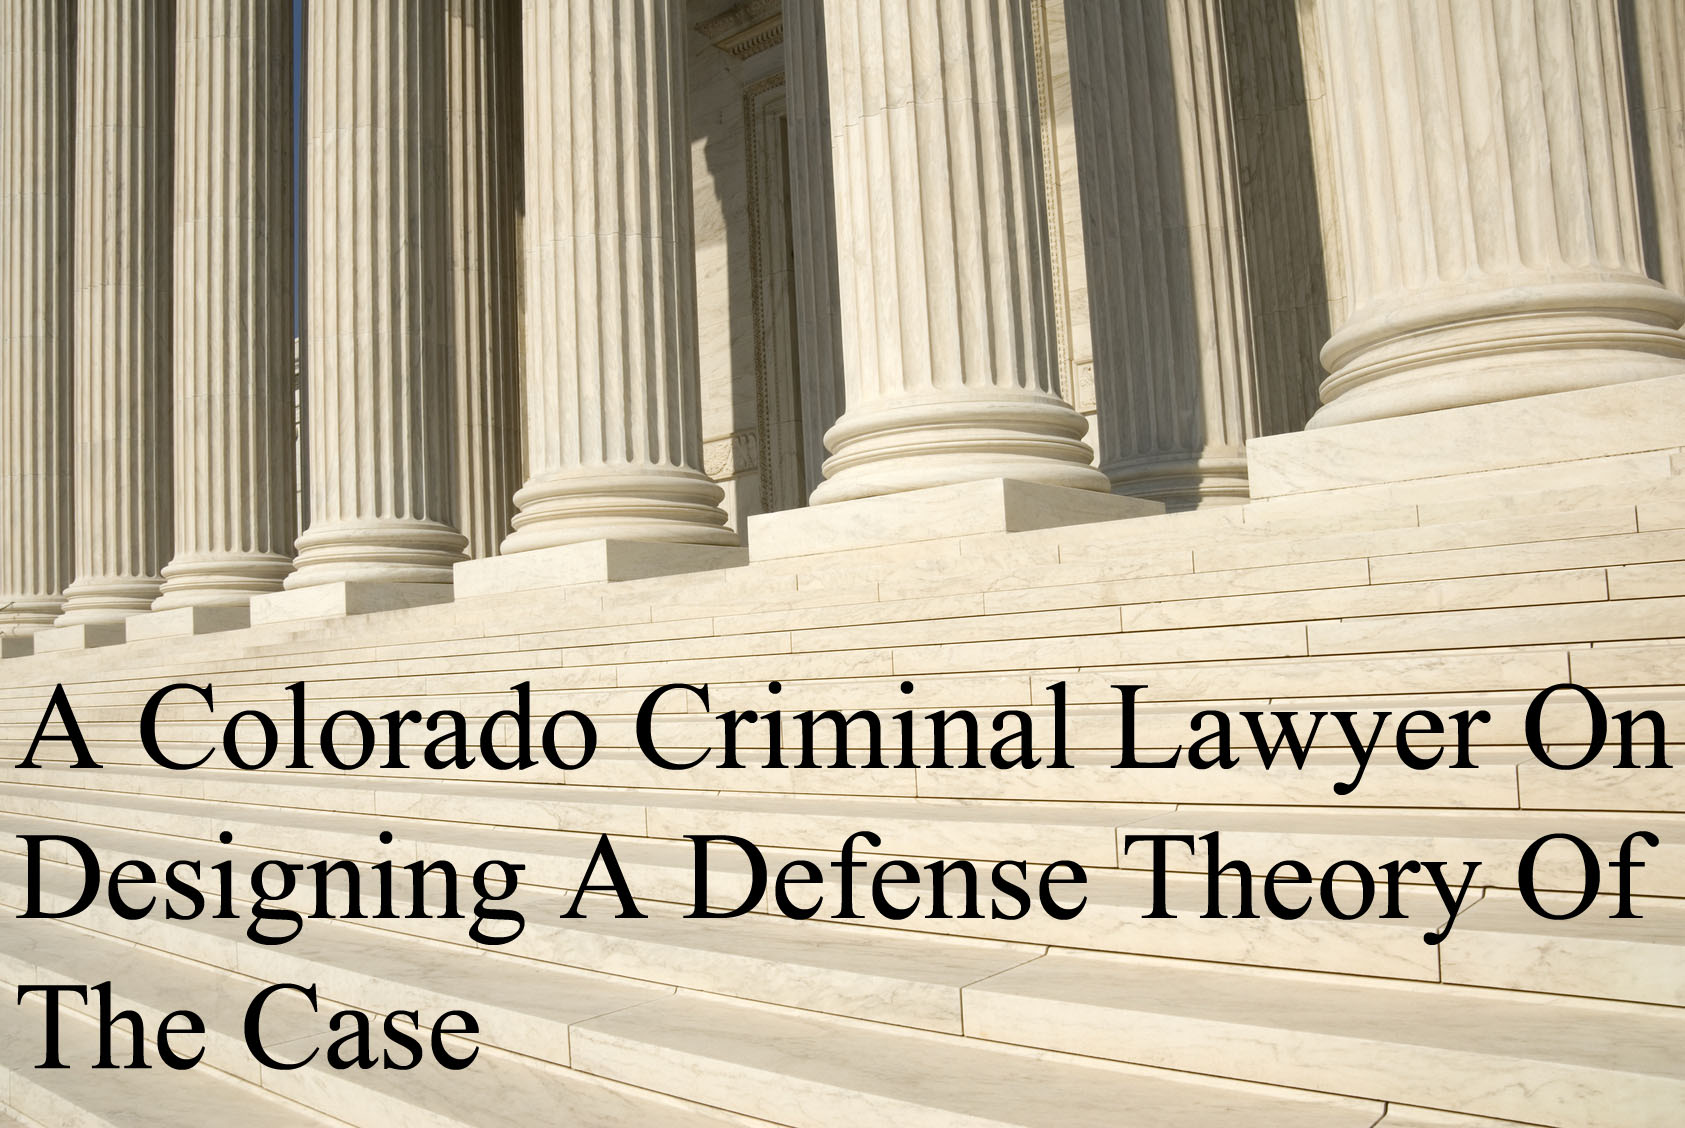 A Colorado Criminal Lawyer On Designing A Defense Theory Of The Case